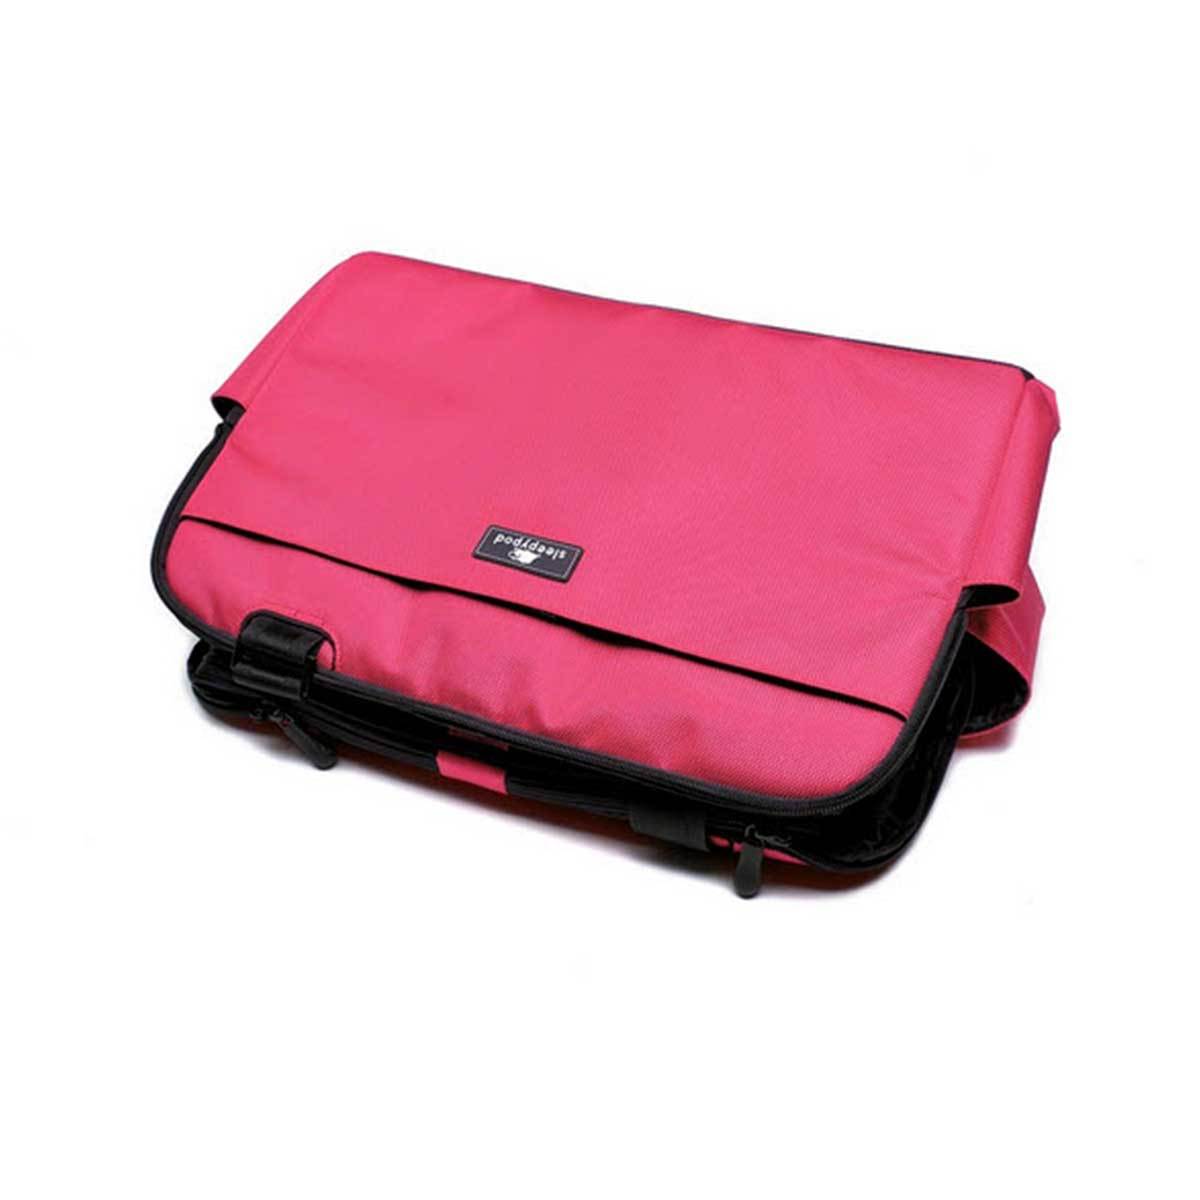 Sleepypod Atom Pet Carrier in Blossom Pink | Pawlicious & Company